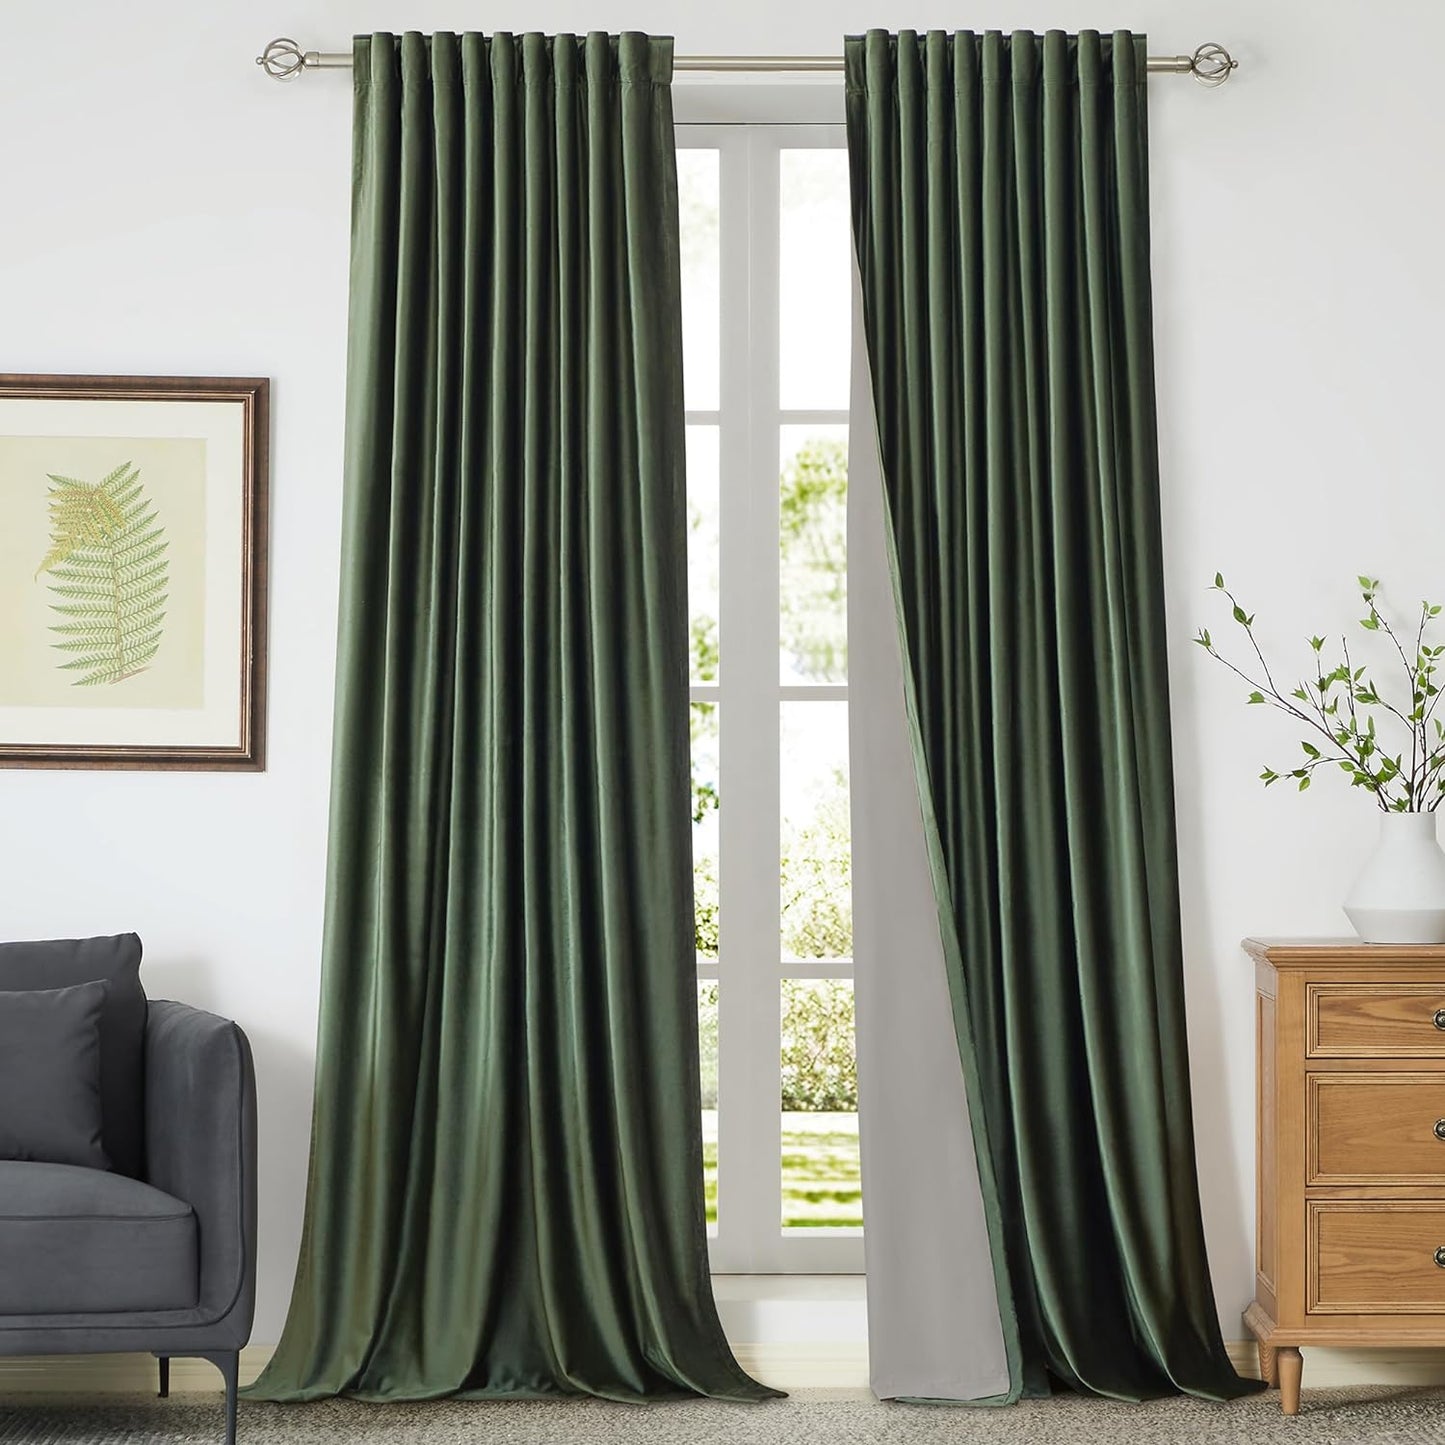 100% Blackout Ivory off White Velvet Curtains 108 Inch Long for Living Room,Set of 2 Panels Liner Rod Pocket Back Tab Thermal Window Drapes Room Darkening Heavy Decorative Curtains for Bedroom  PRIMROSE Olive Green 52X96 Inches 